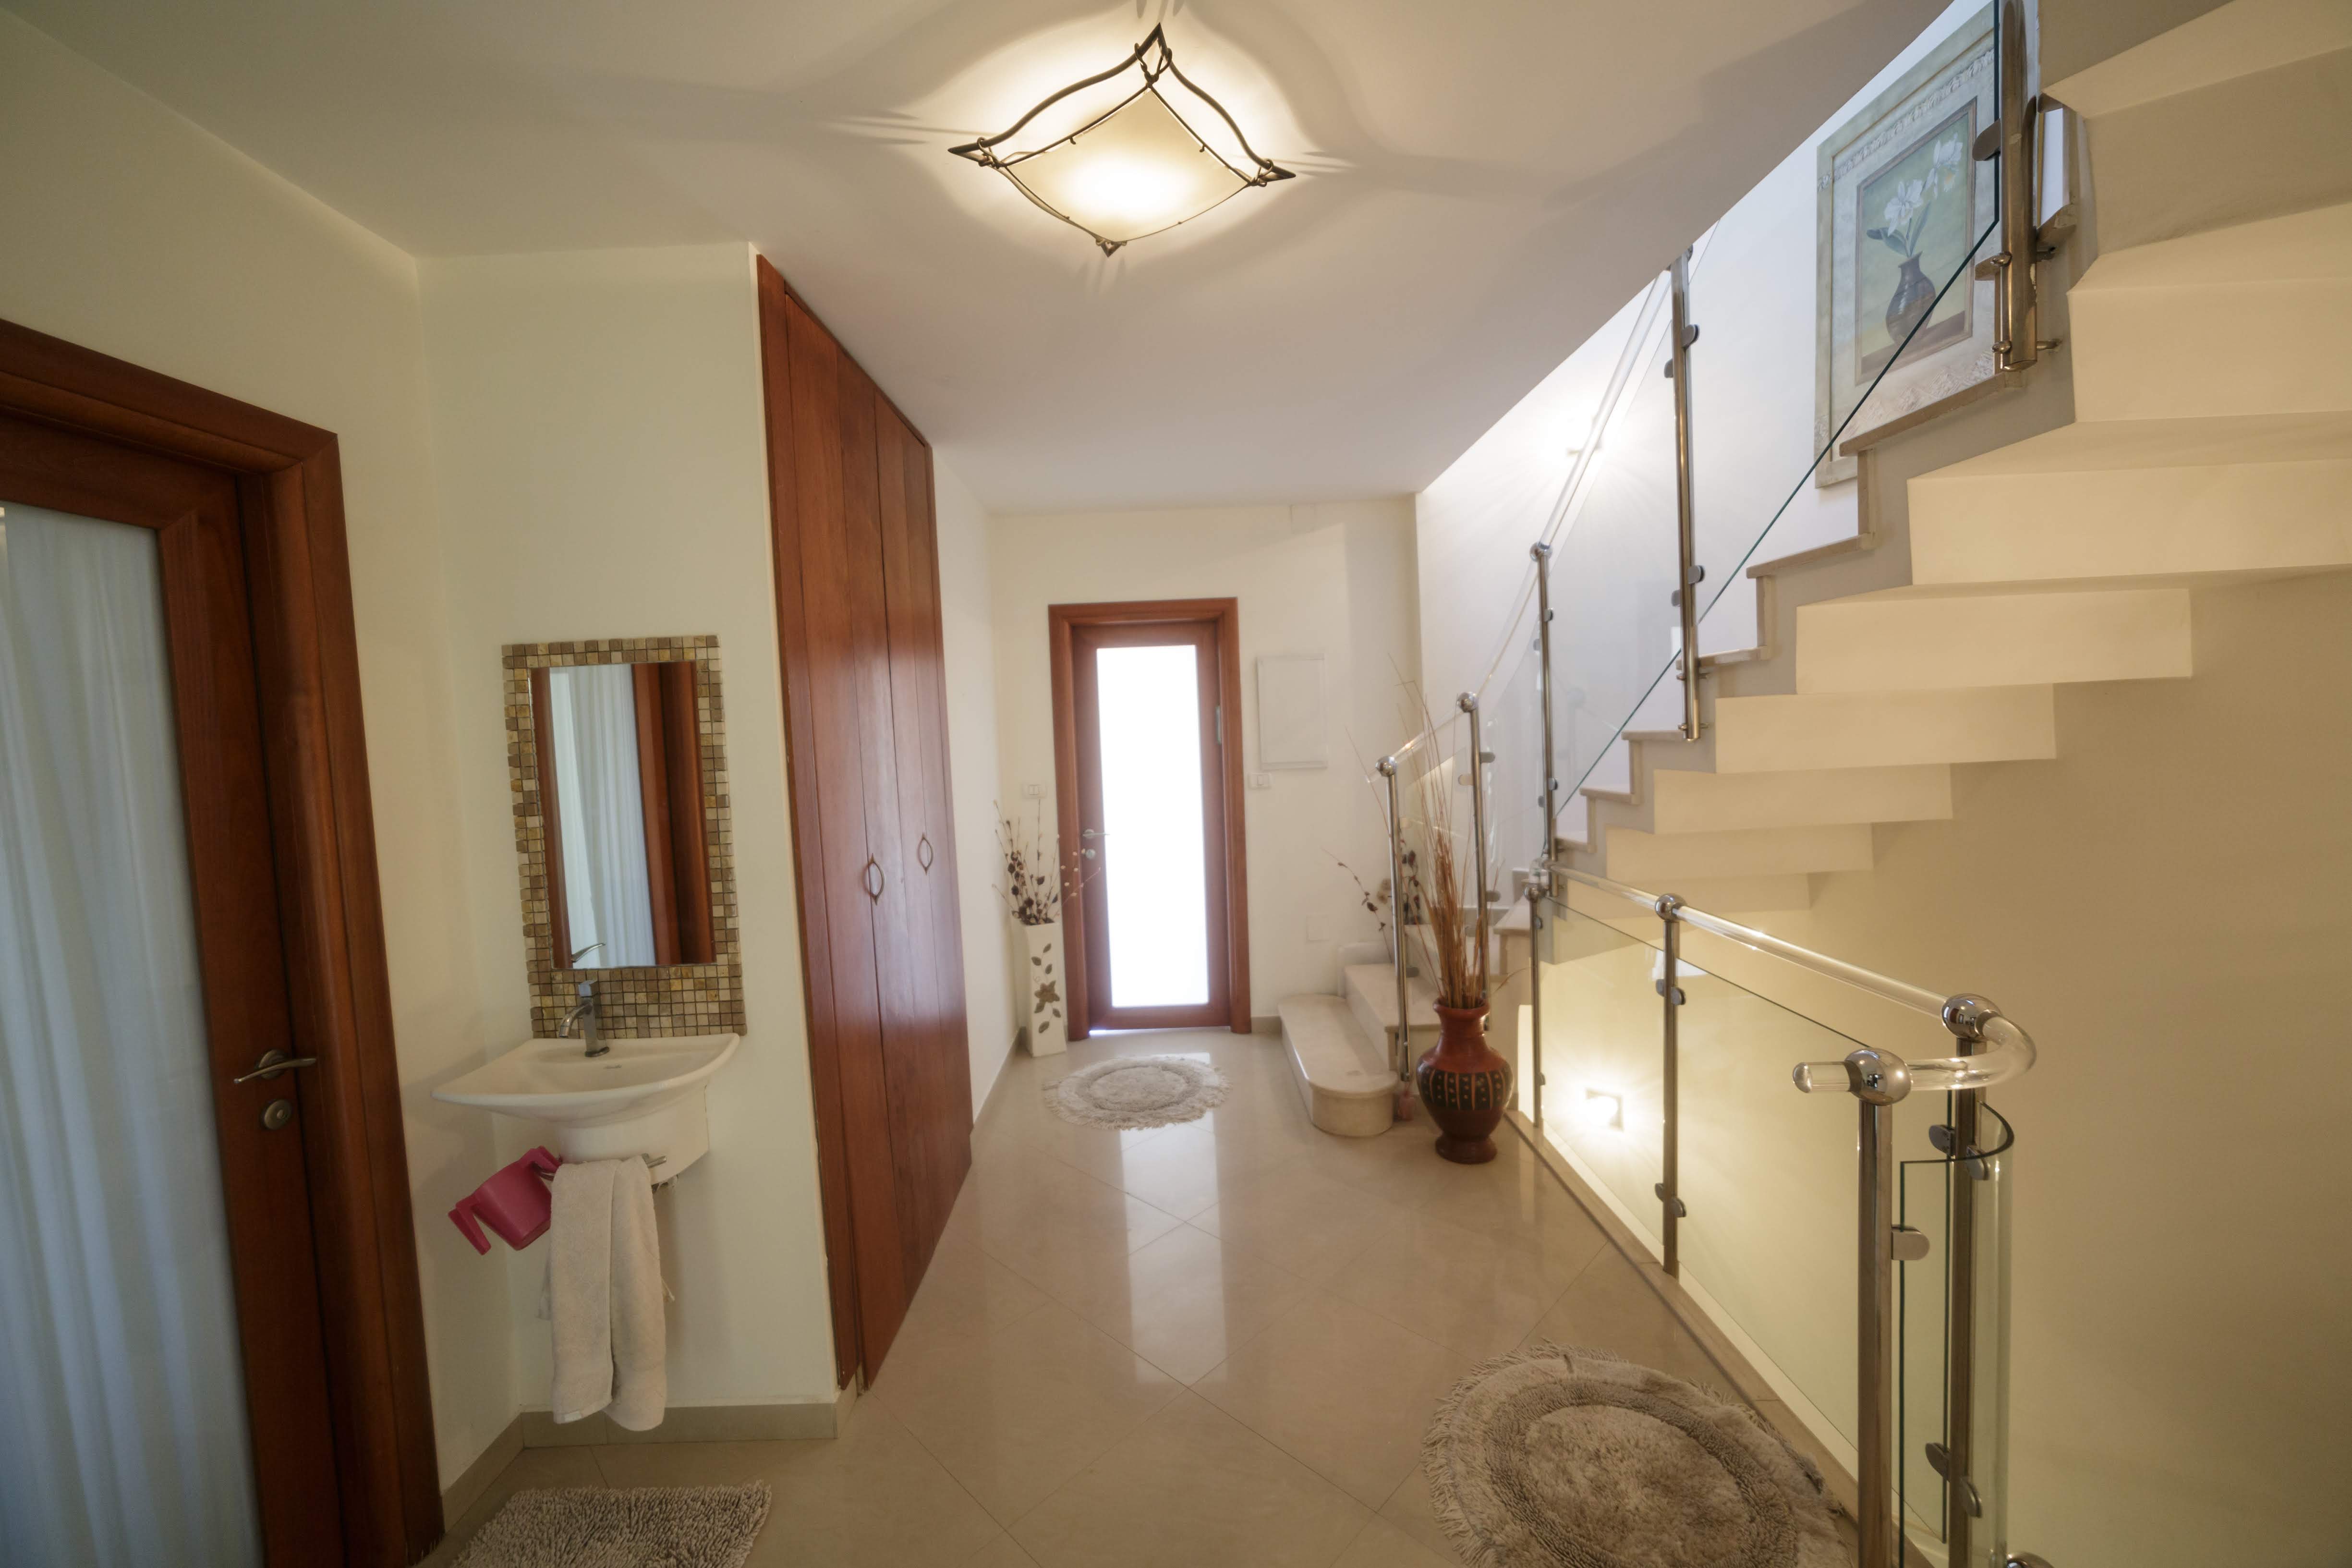 Staircase to Bedrooms